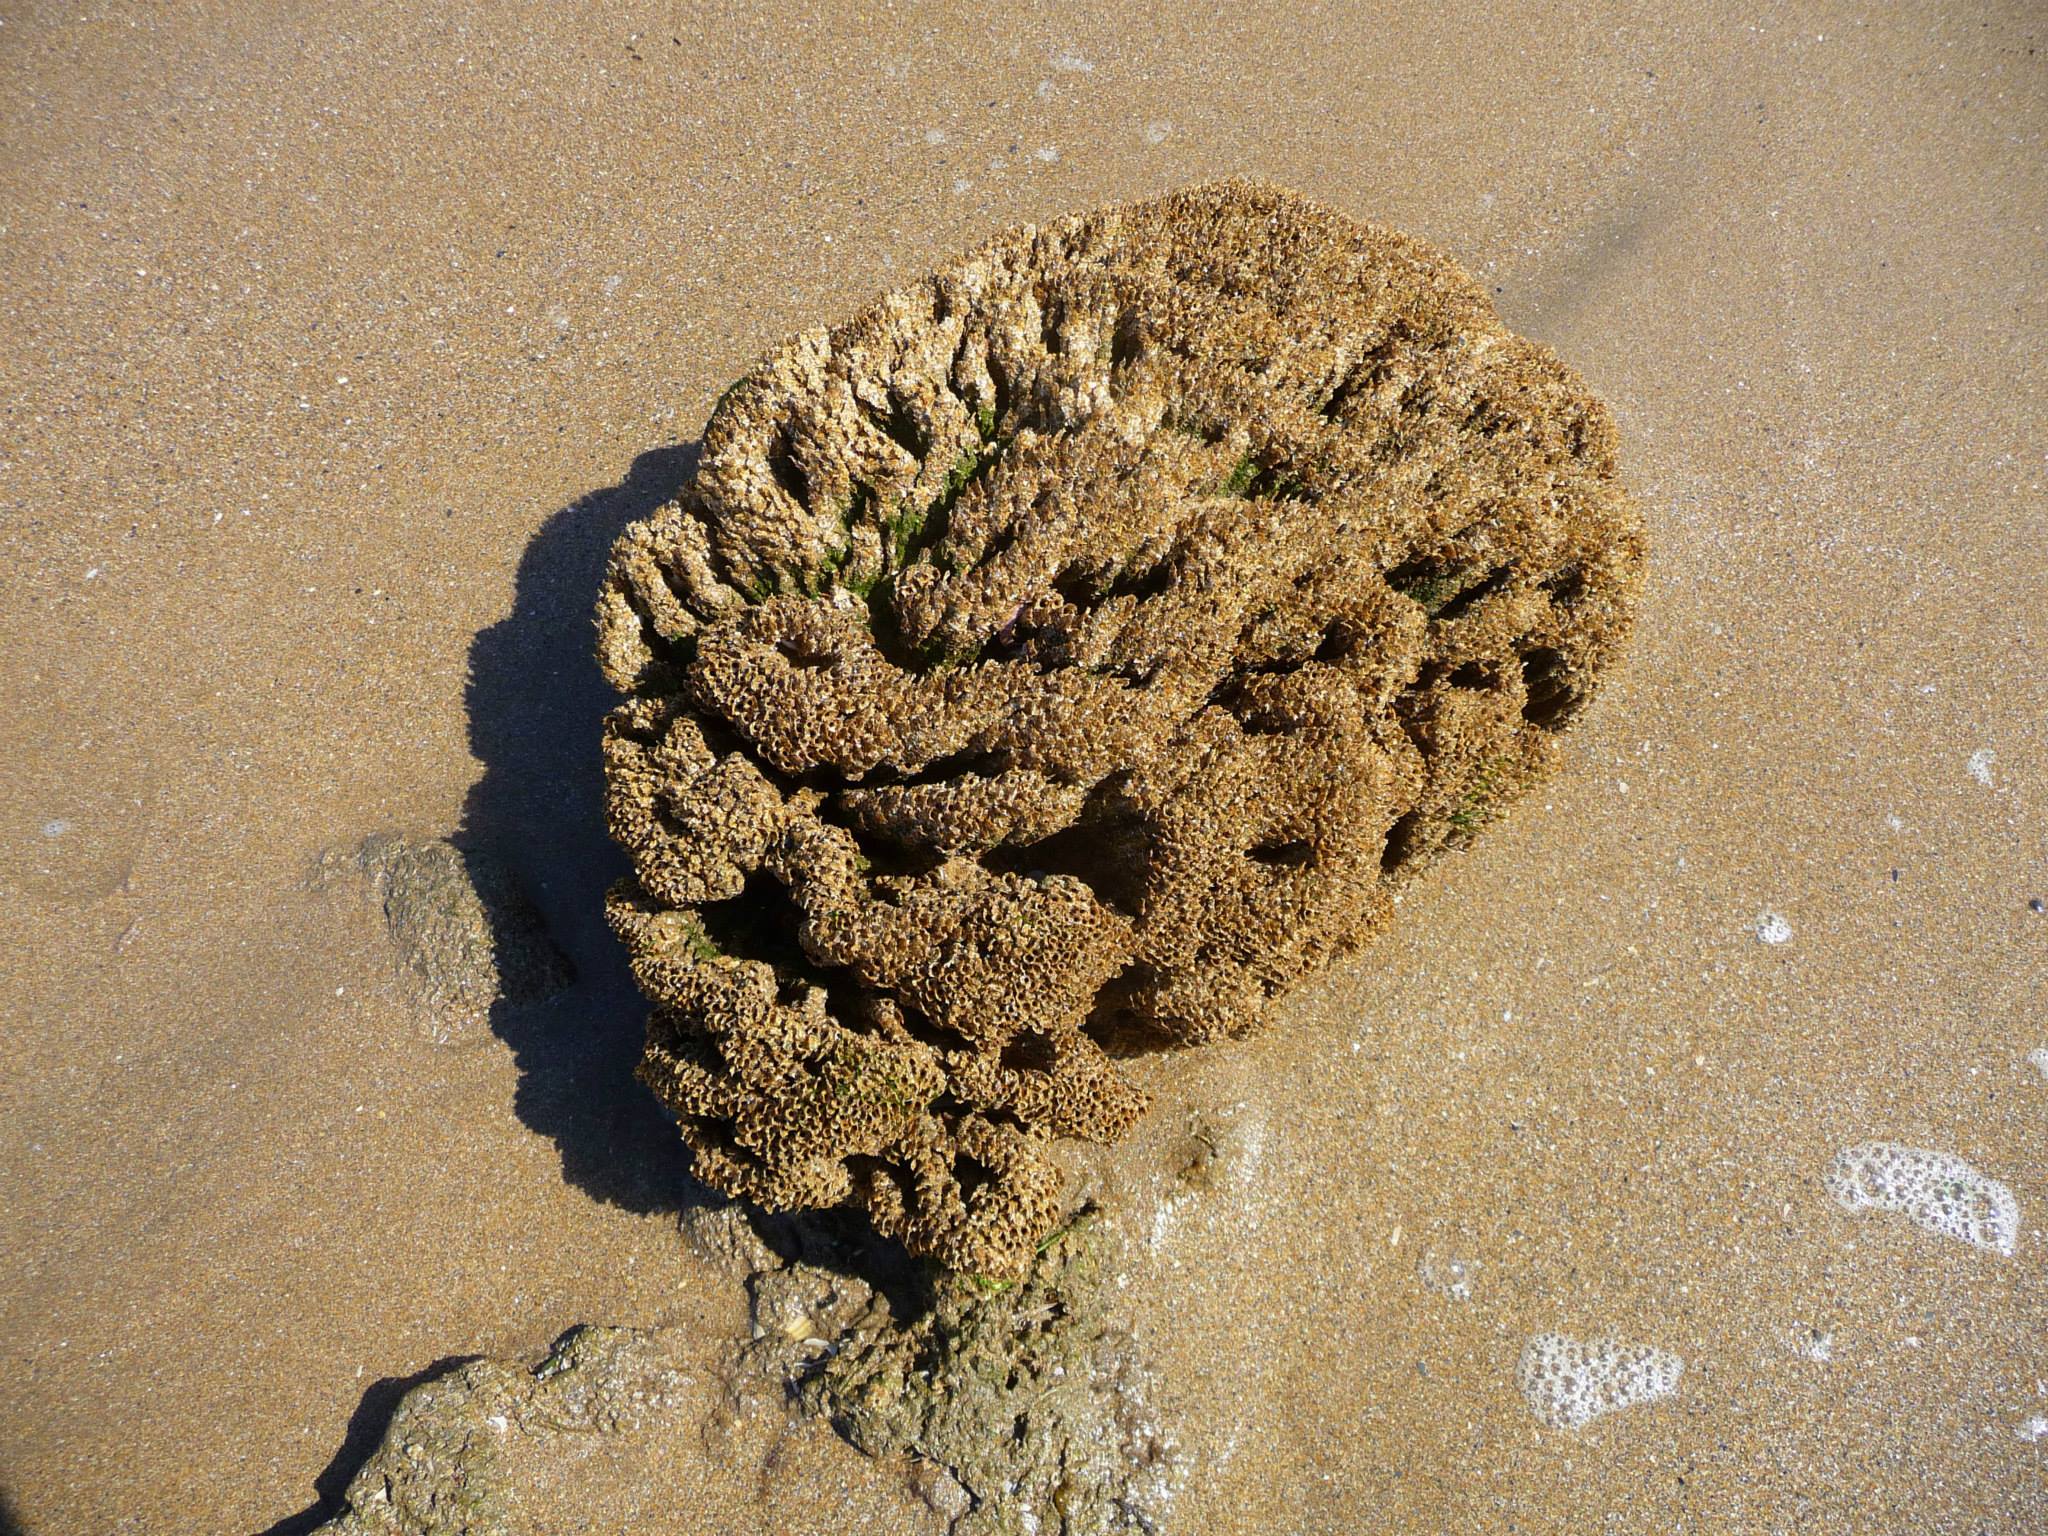 Picture of a brain like honeycomb worm reef.